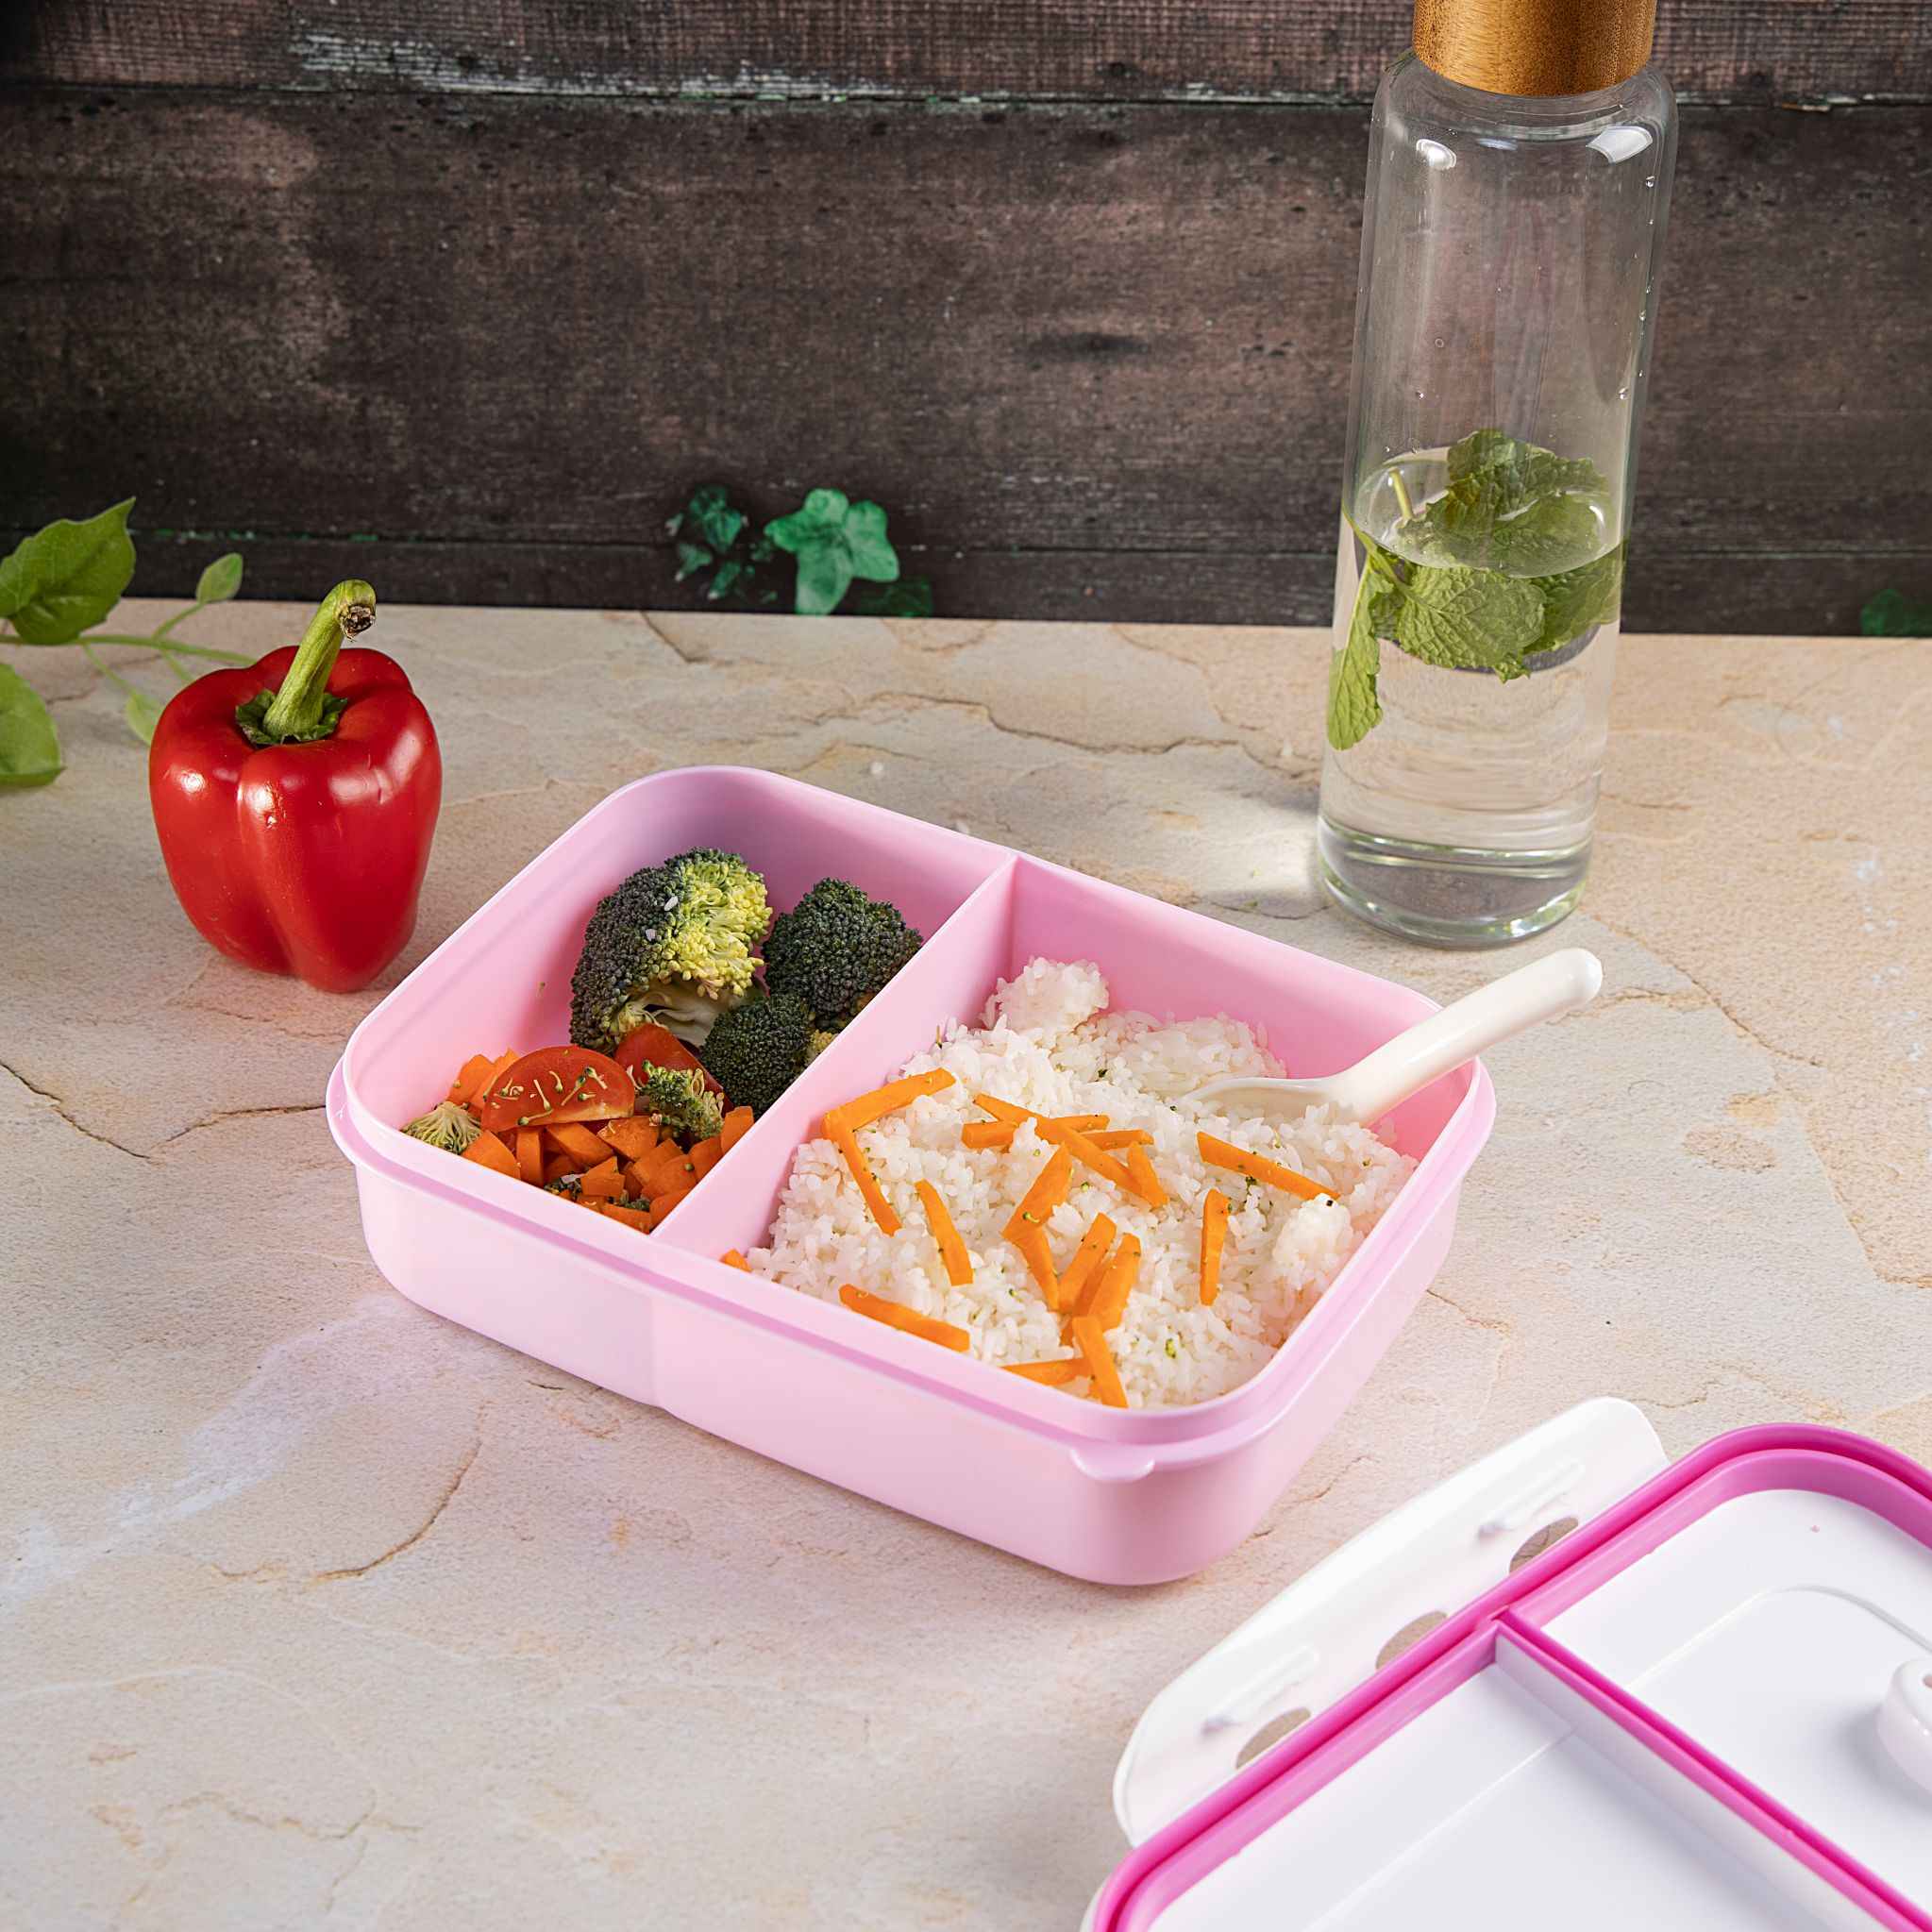 Royalford Rf4398Pn Air Tight Lunch Box/Pink - Durable & Airtight Lid| Ideal For Carrying Snacks, Lunch & Dinner To Office, Home. Sports Ground, Gym & More